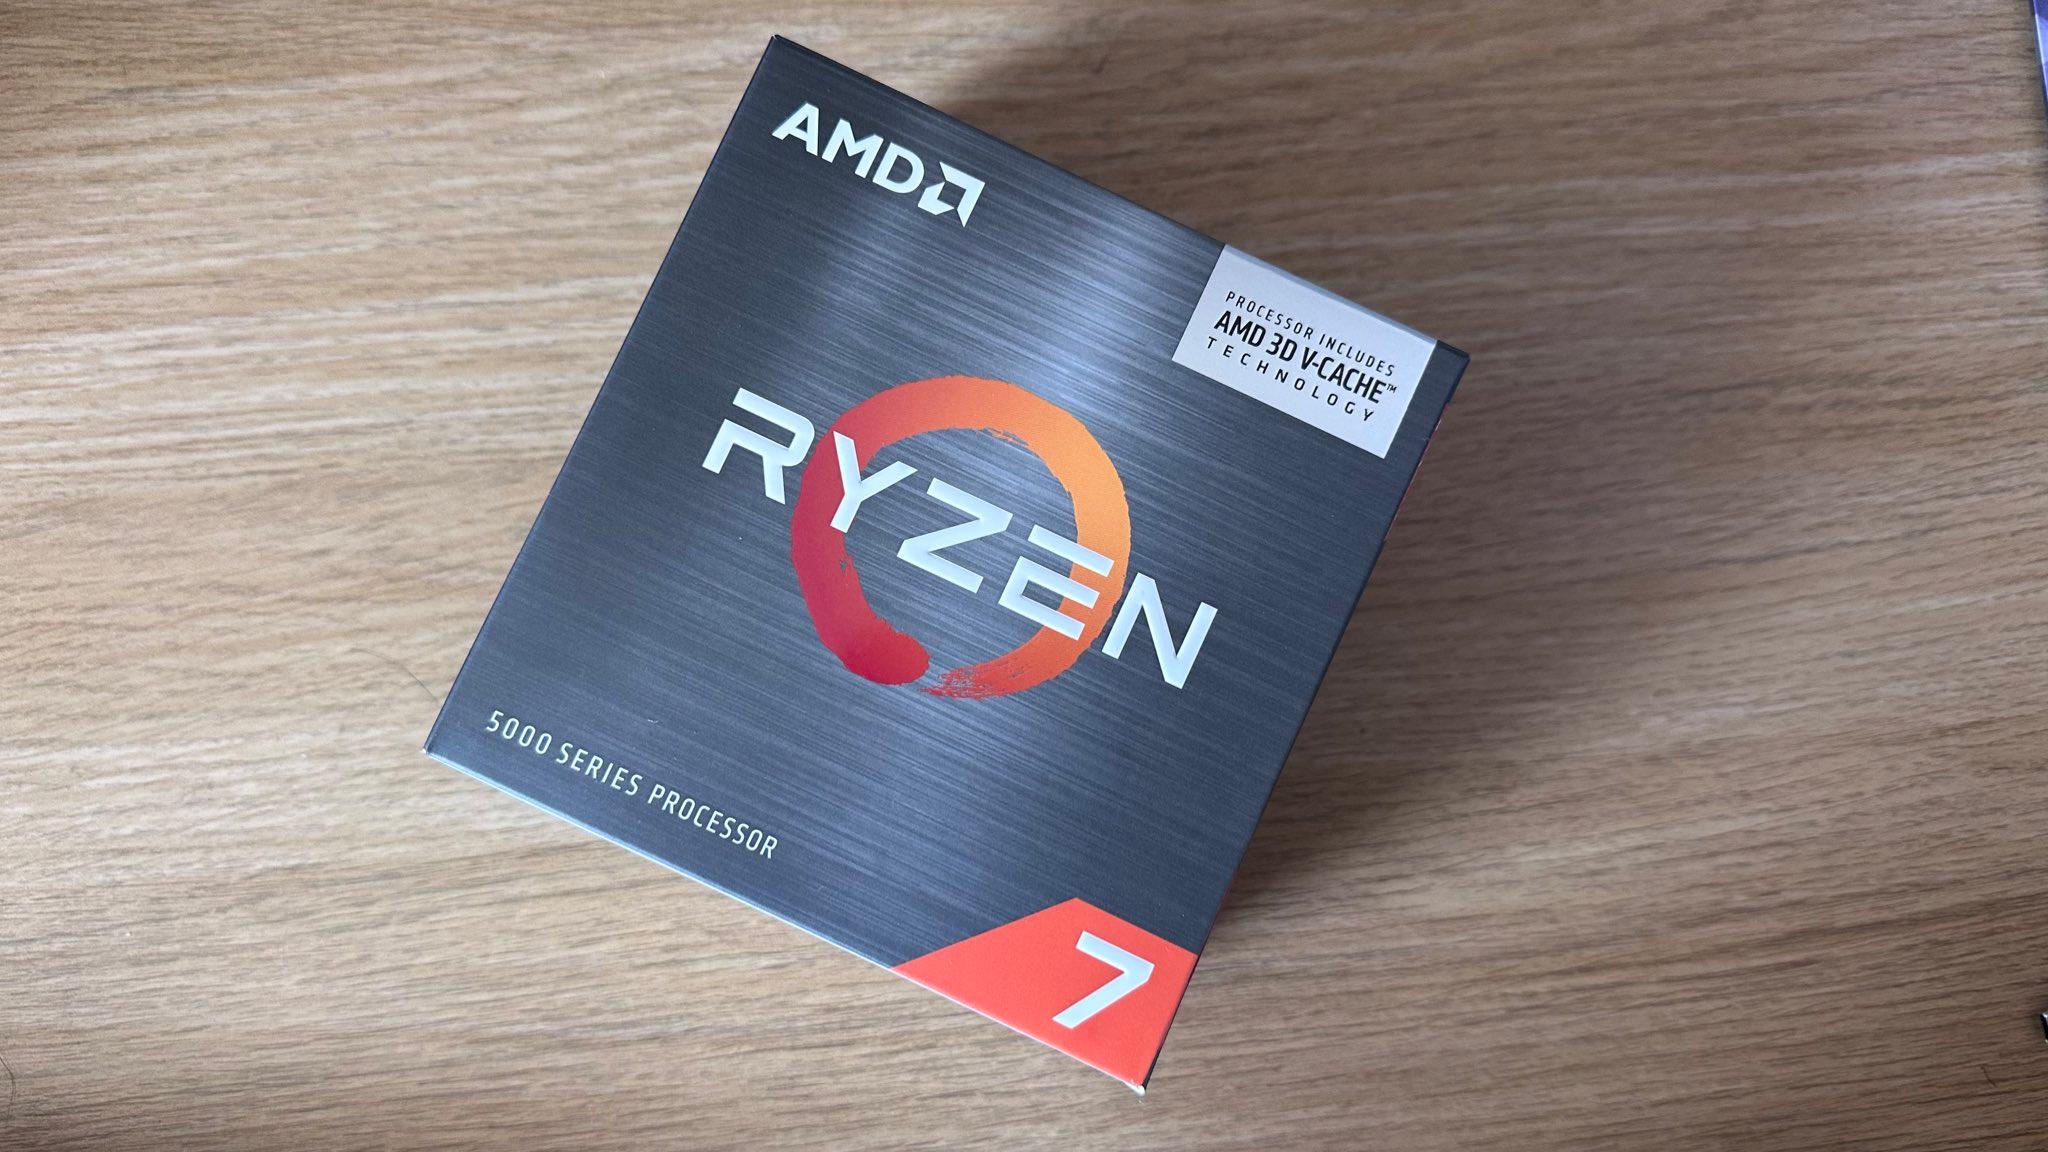 There's never been a better time to upgrade to the Ryzen 5800X3D - Dexerto